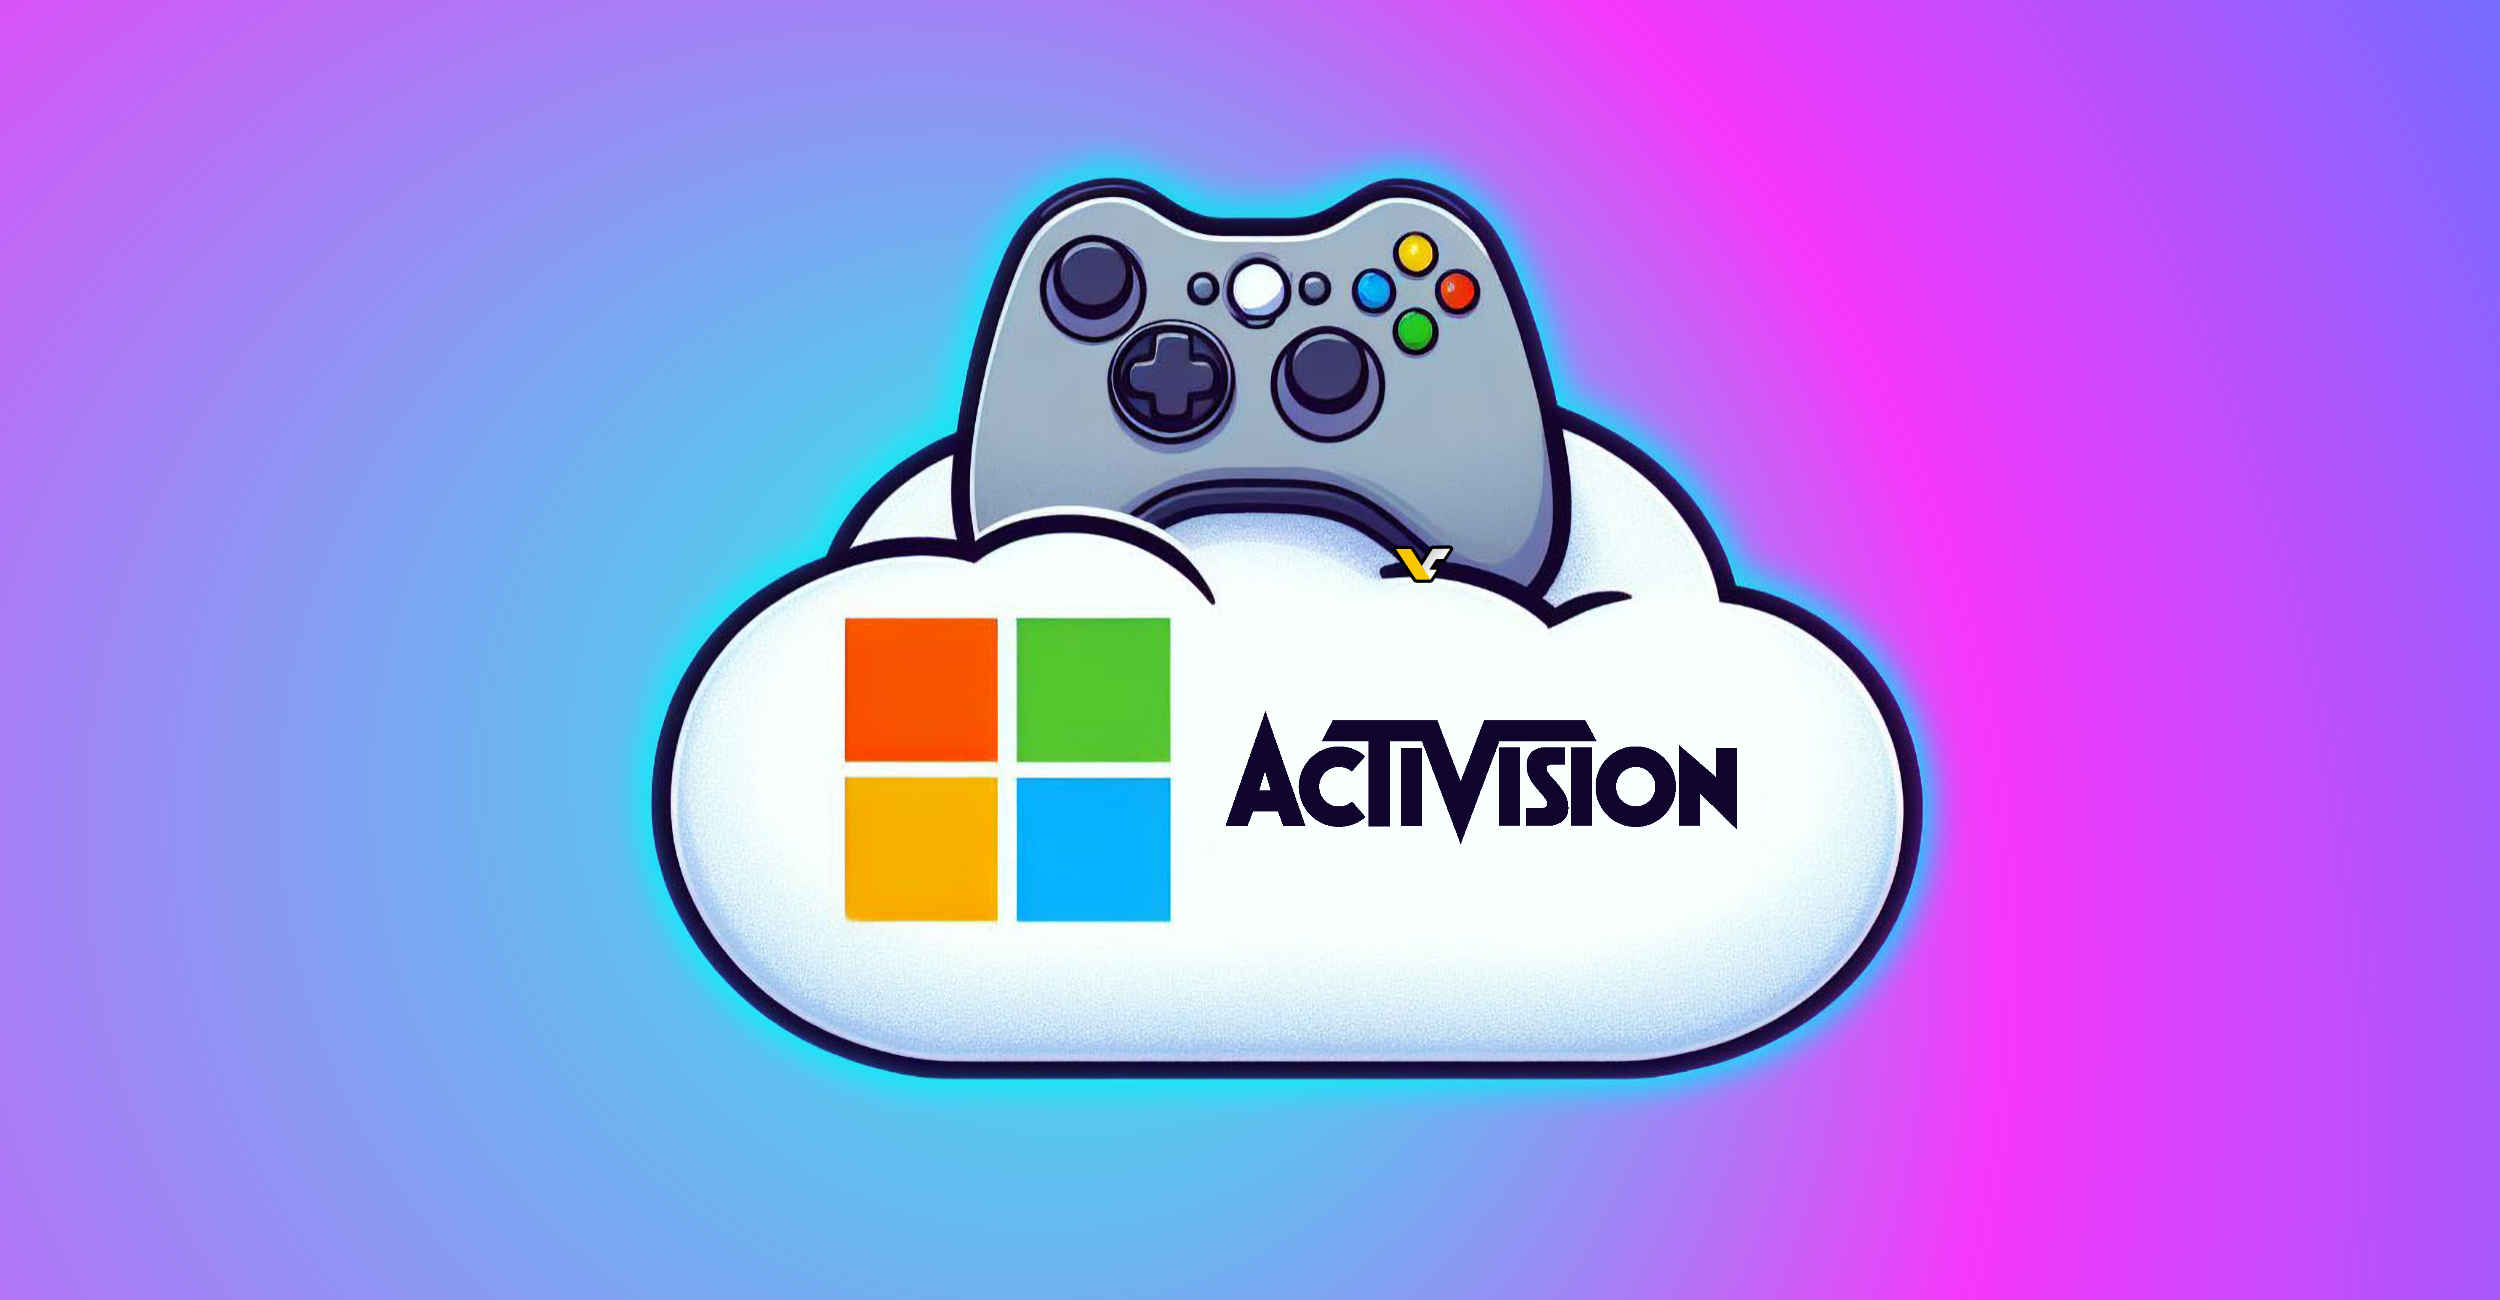 Microsoft clears last hurdle to buying Activision